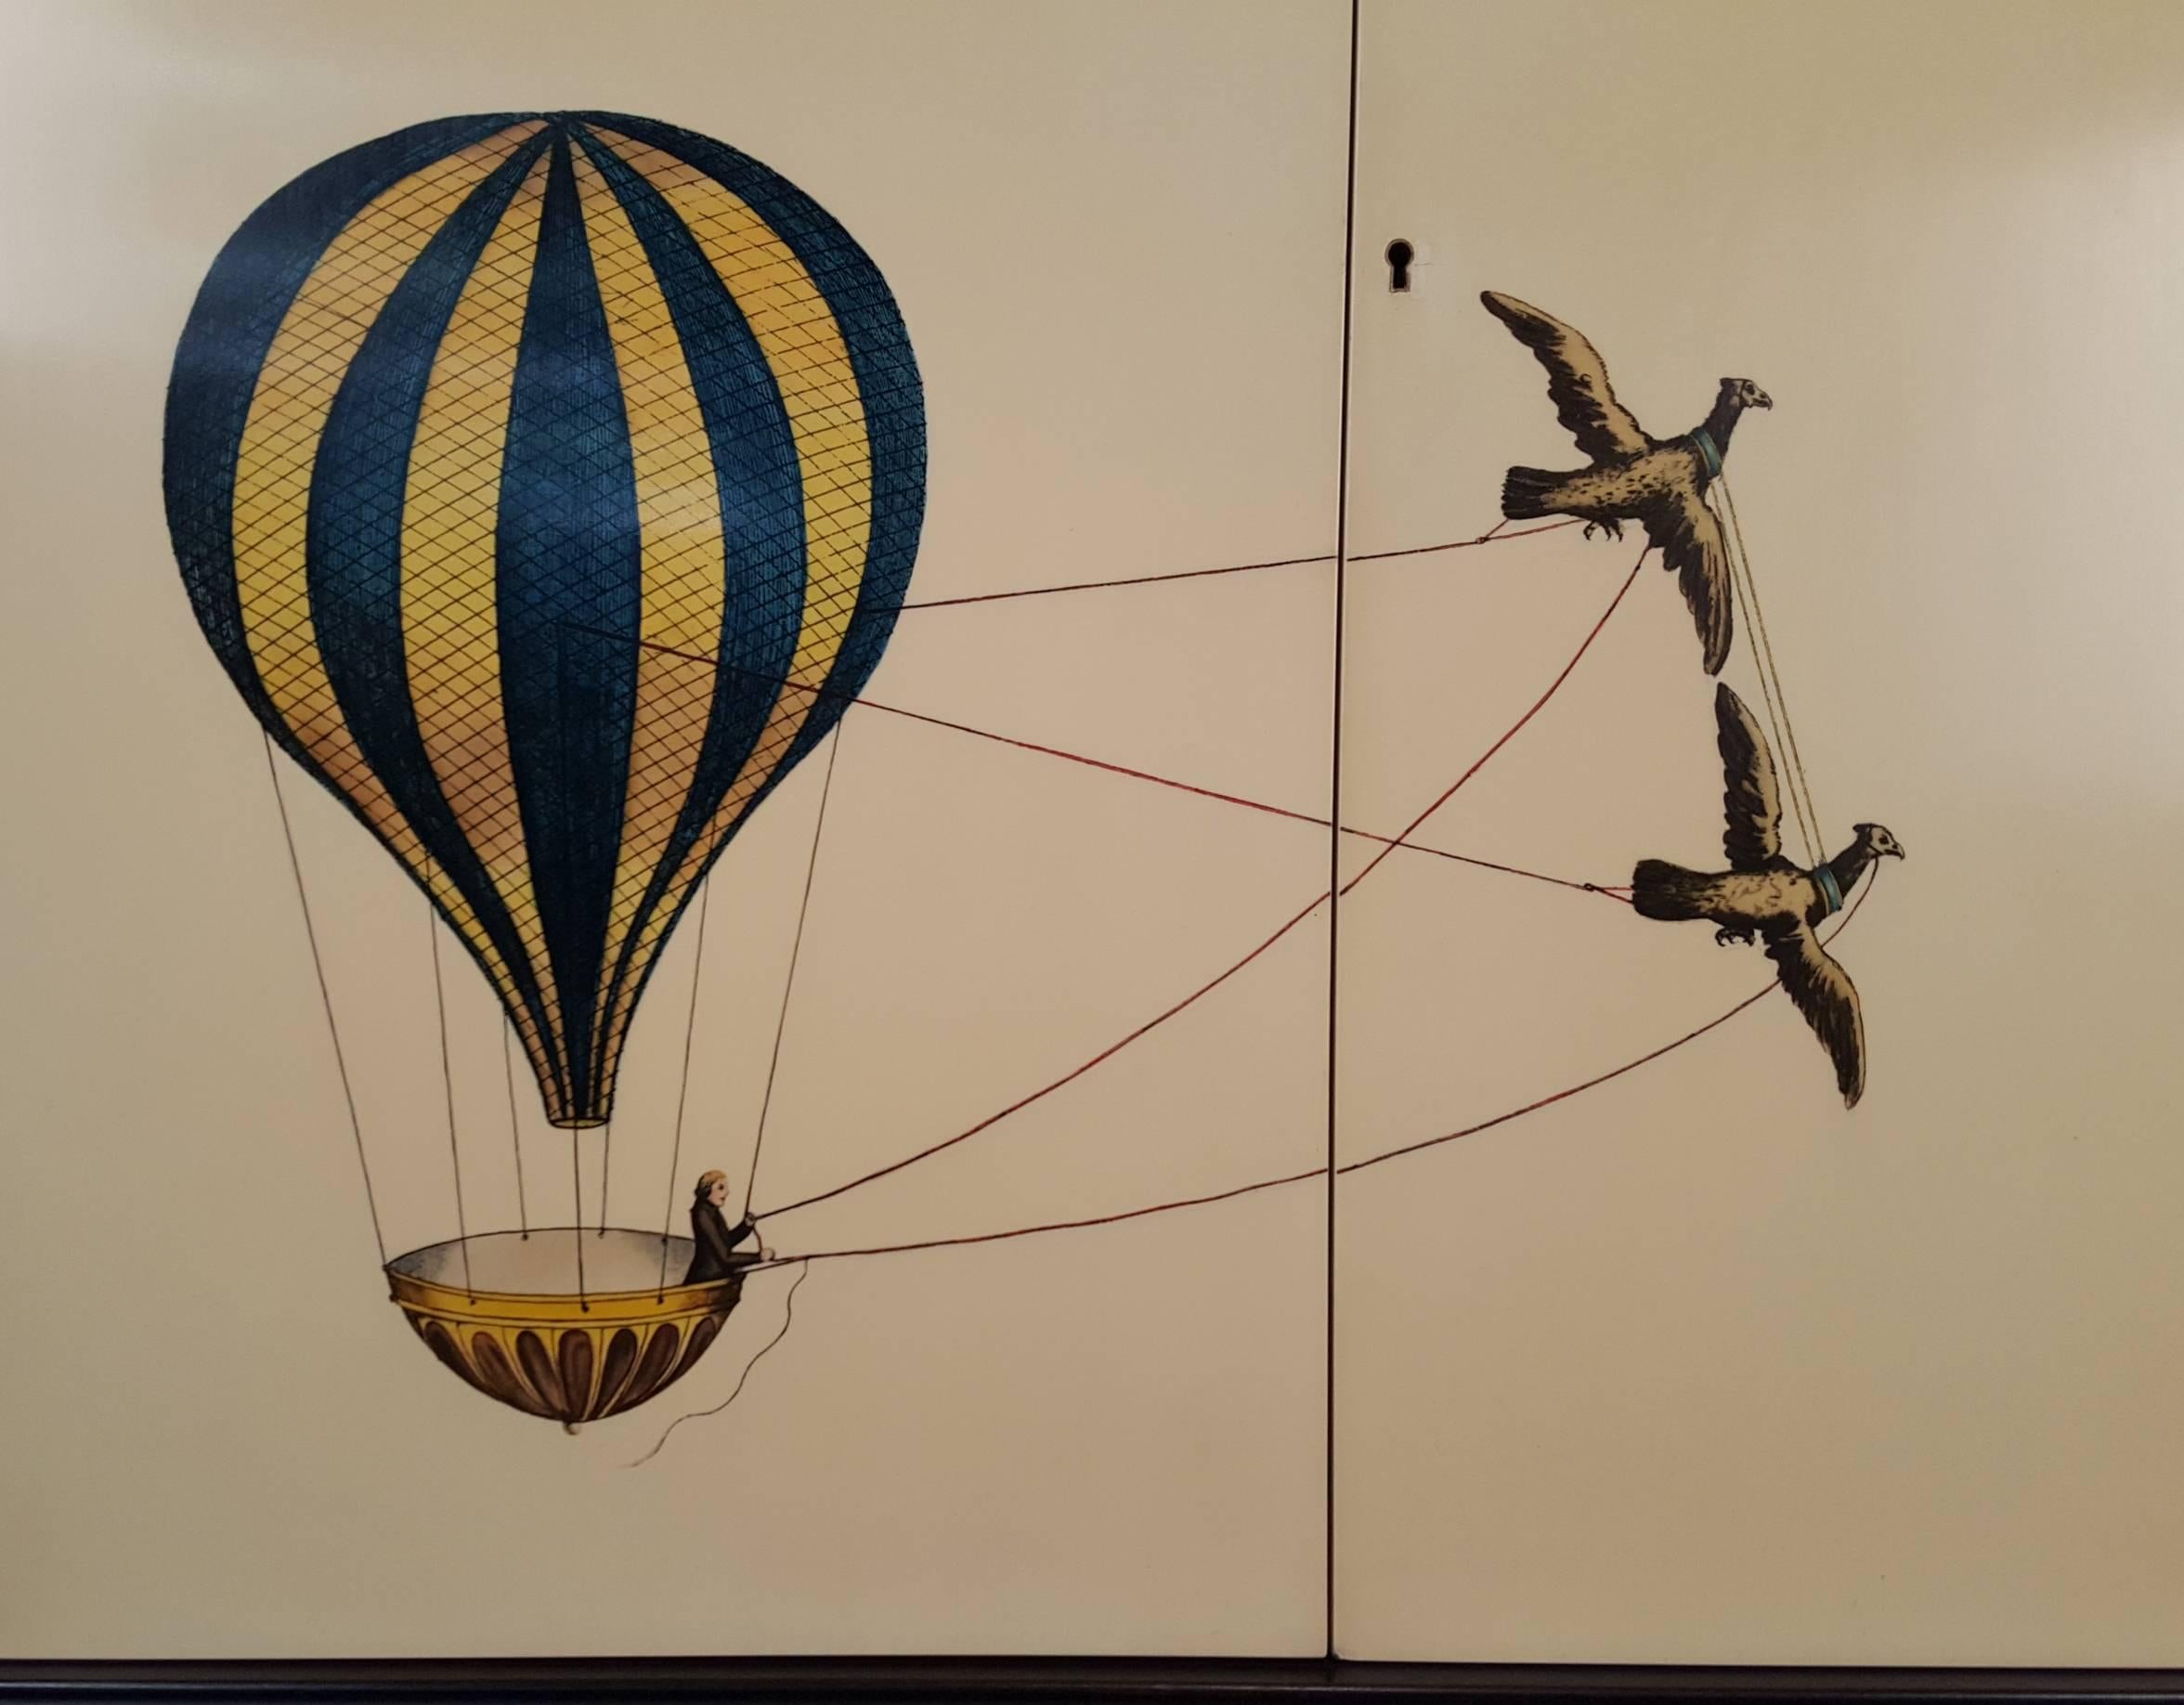 20th Century Trompe L'oeil Cabinet Embellished with 18th Century Aeronautical Motif